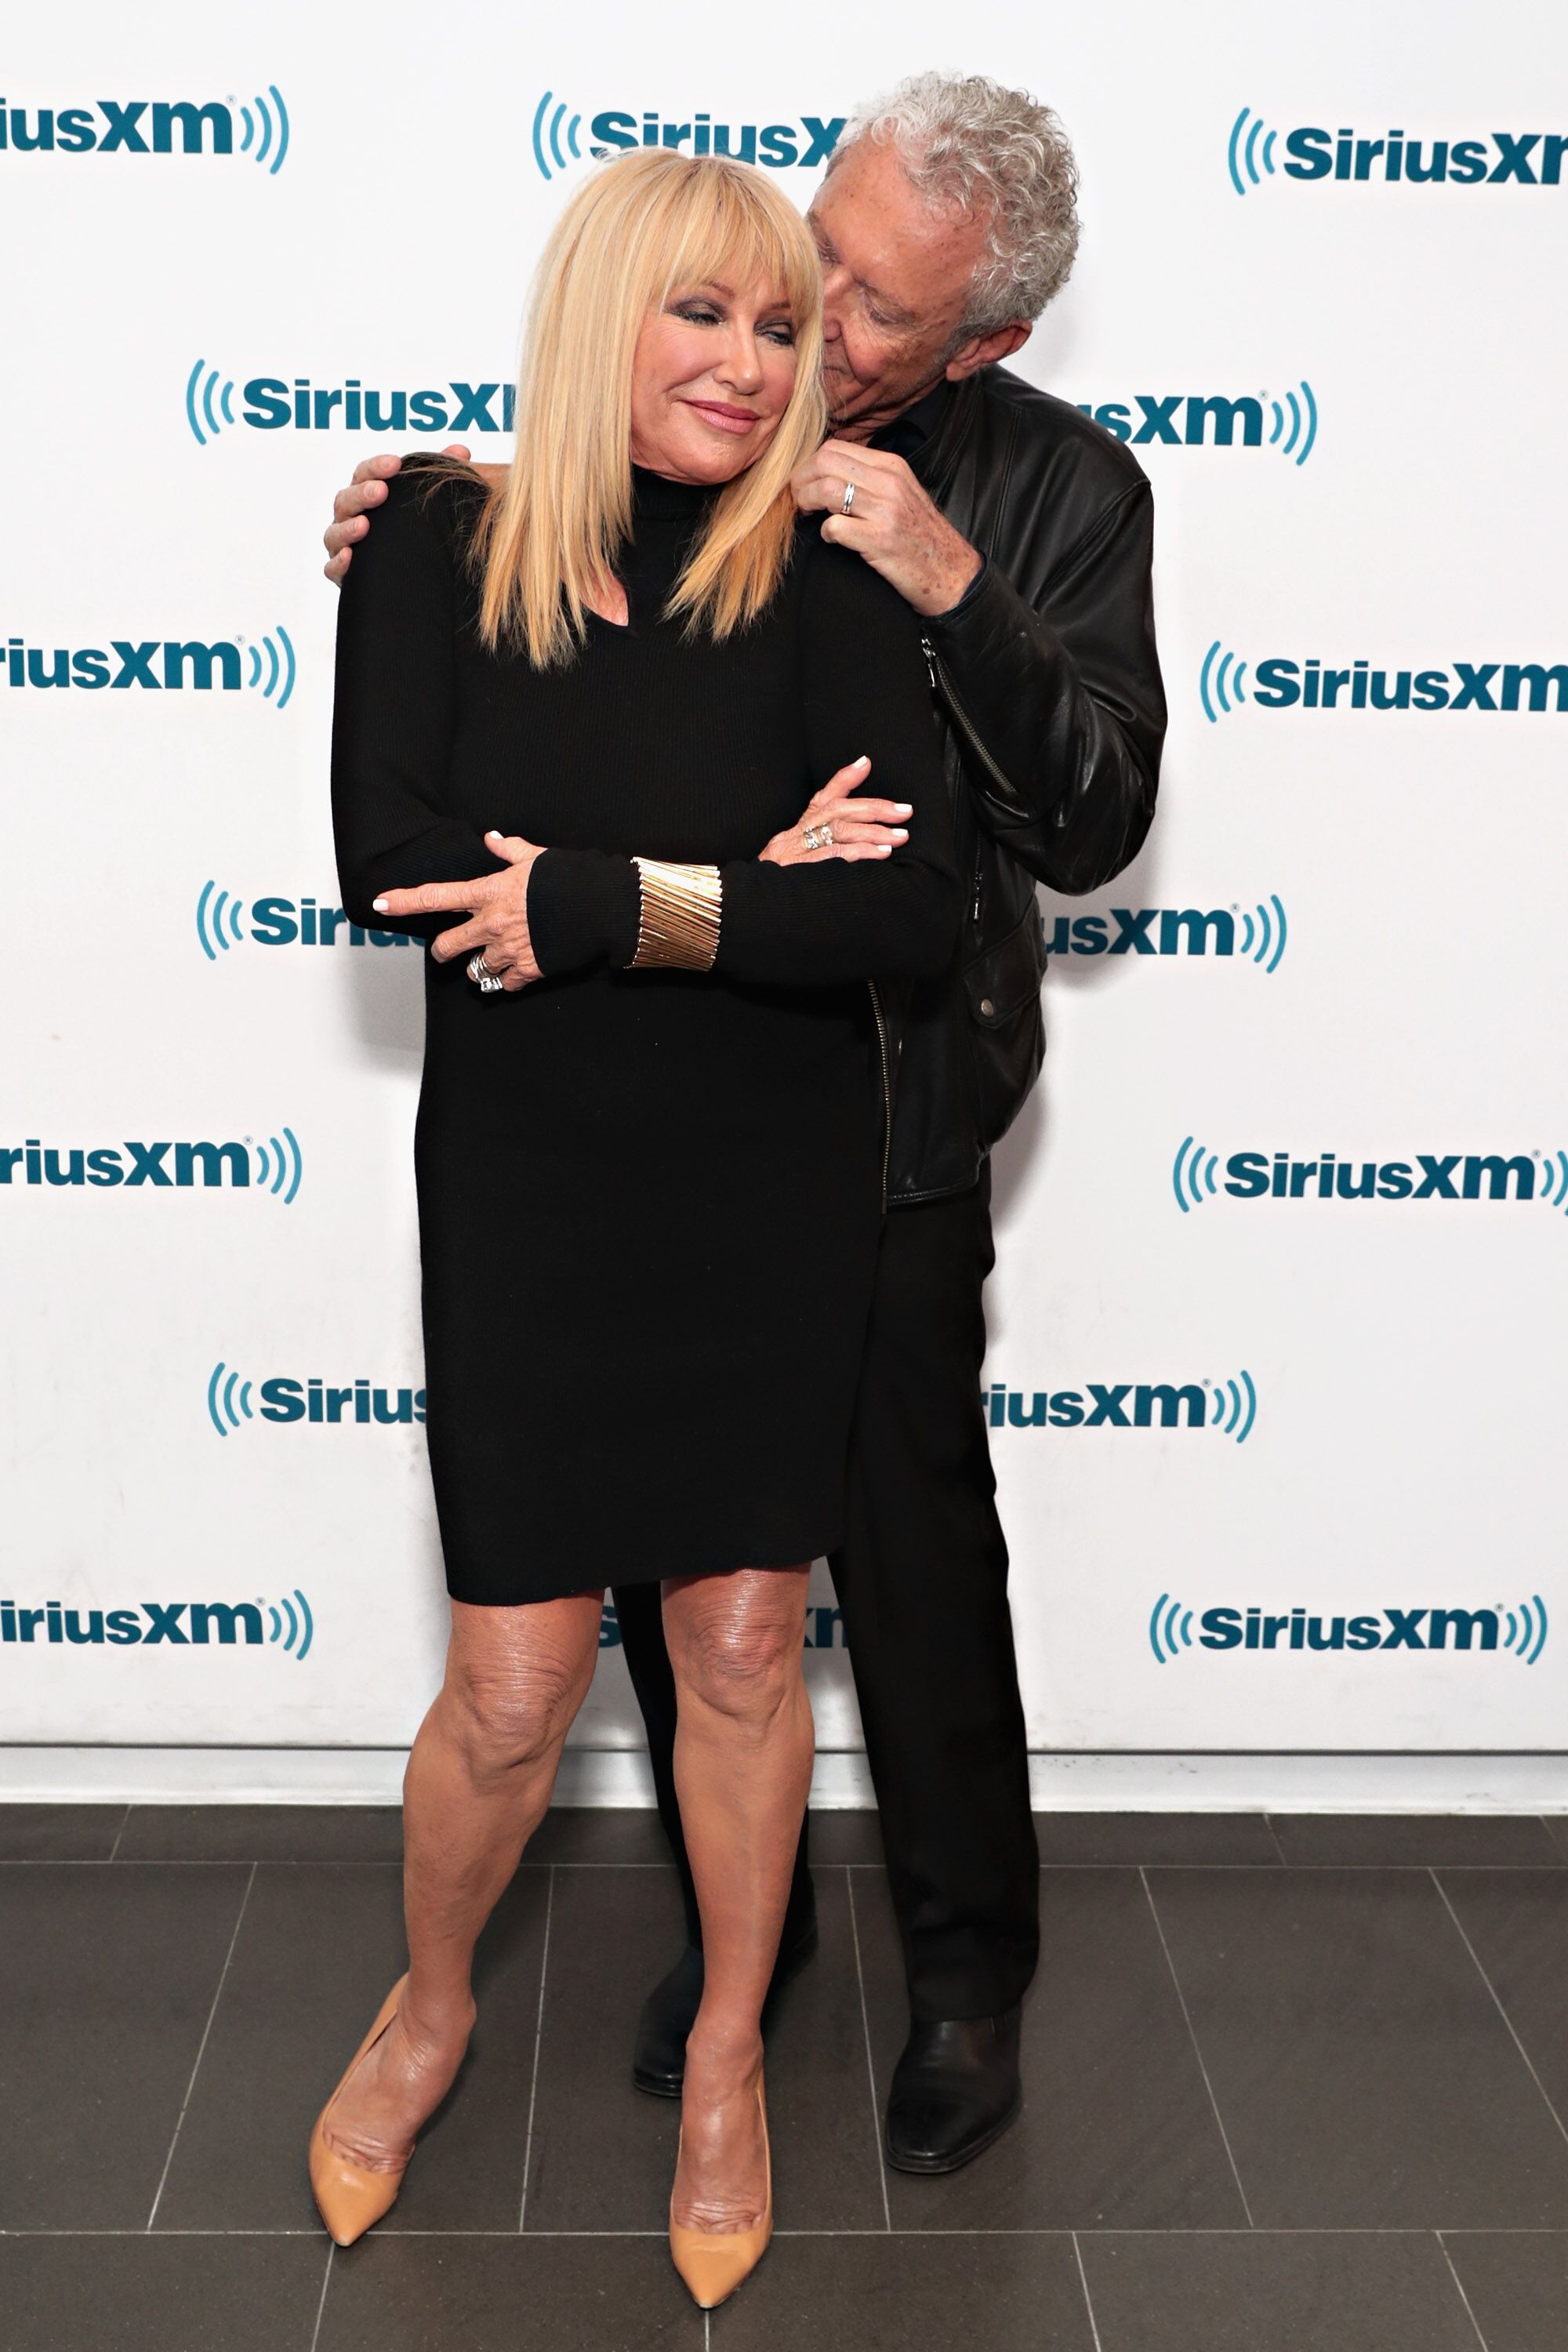 Suzanne Somers and husband Alan Hamel visit the SiriusXM Studios in 2017 | Source: Getty Images